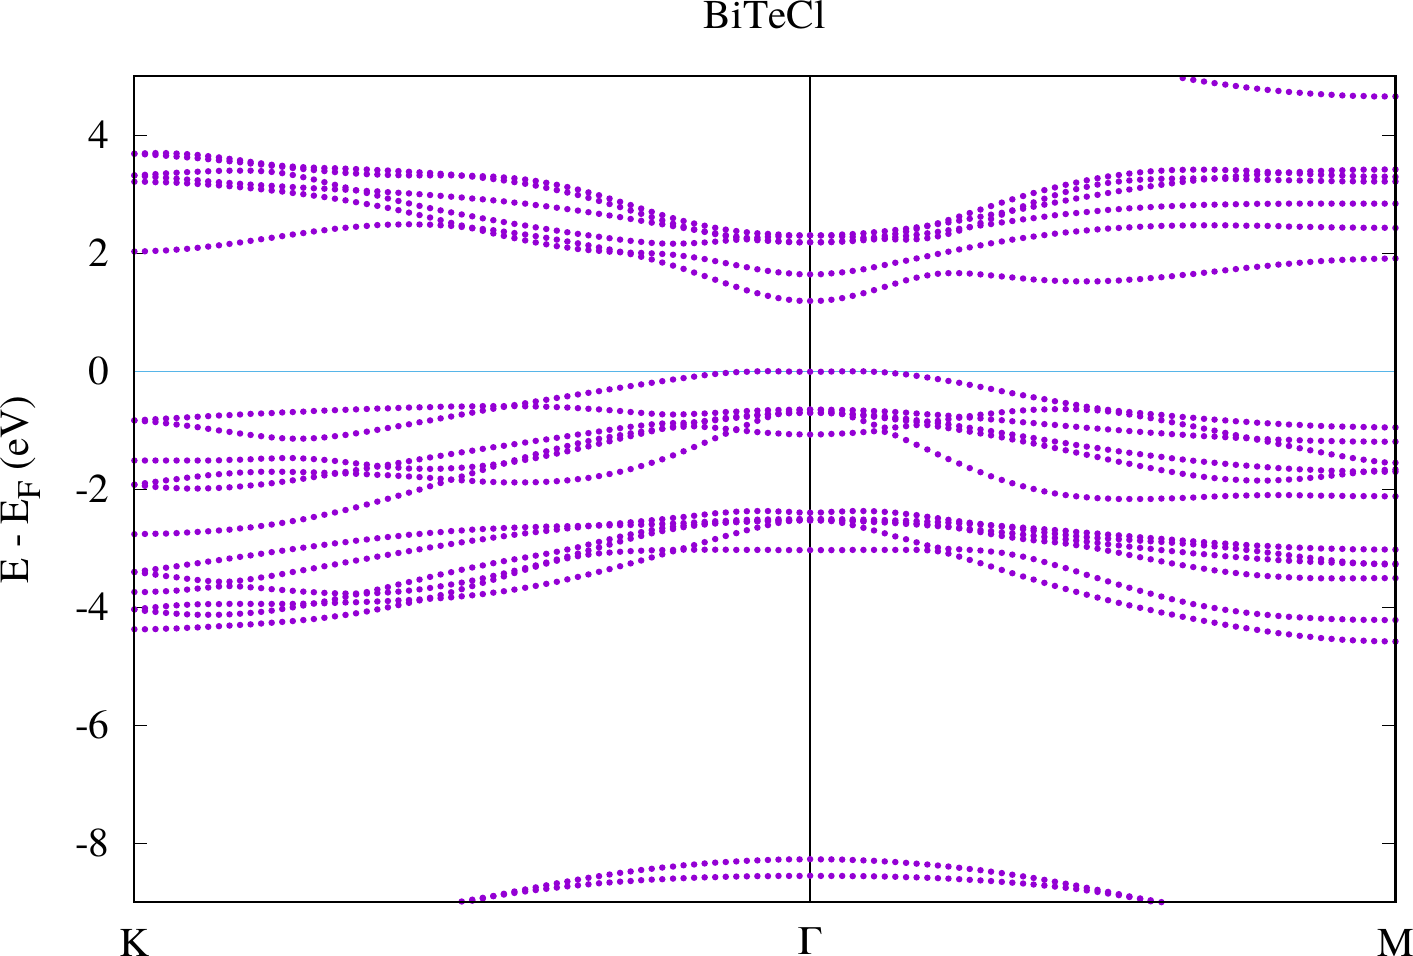 cap=Band structure of BiTeCl without SOC.,width=0.8\textwidth